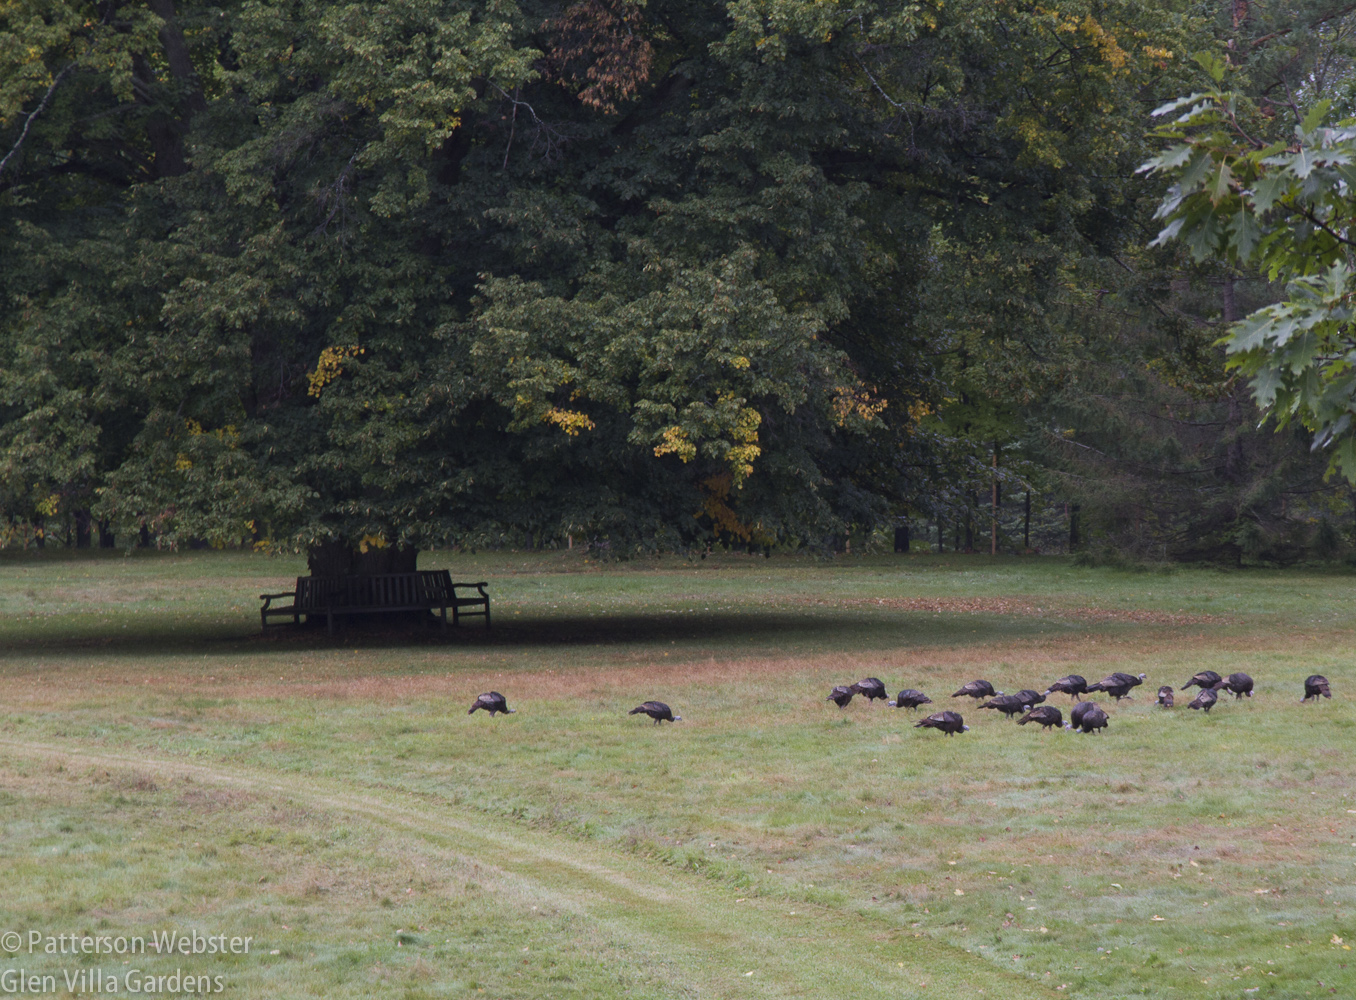 Wild turkeys enjoy munching on the grass and whatever it offers.